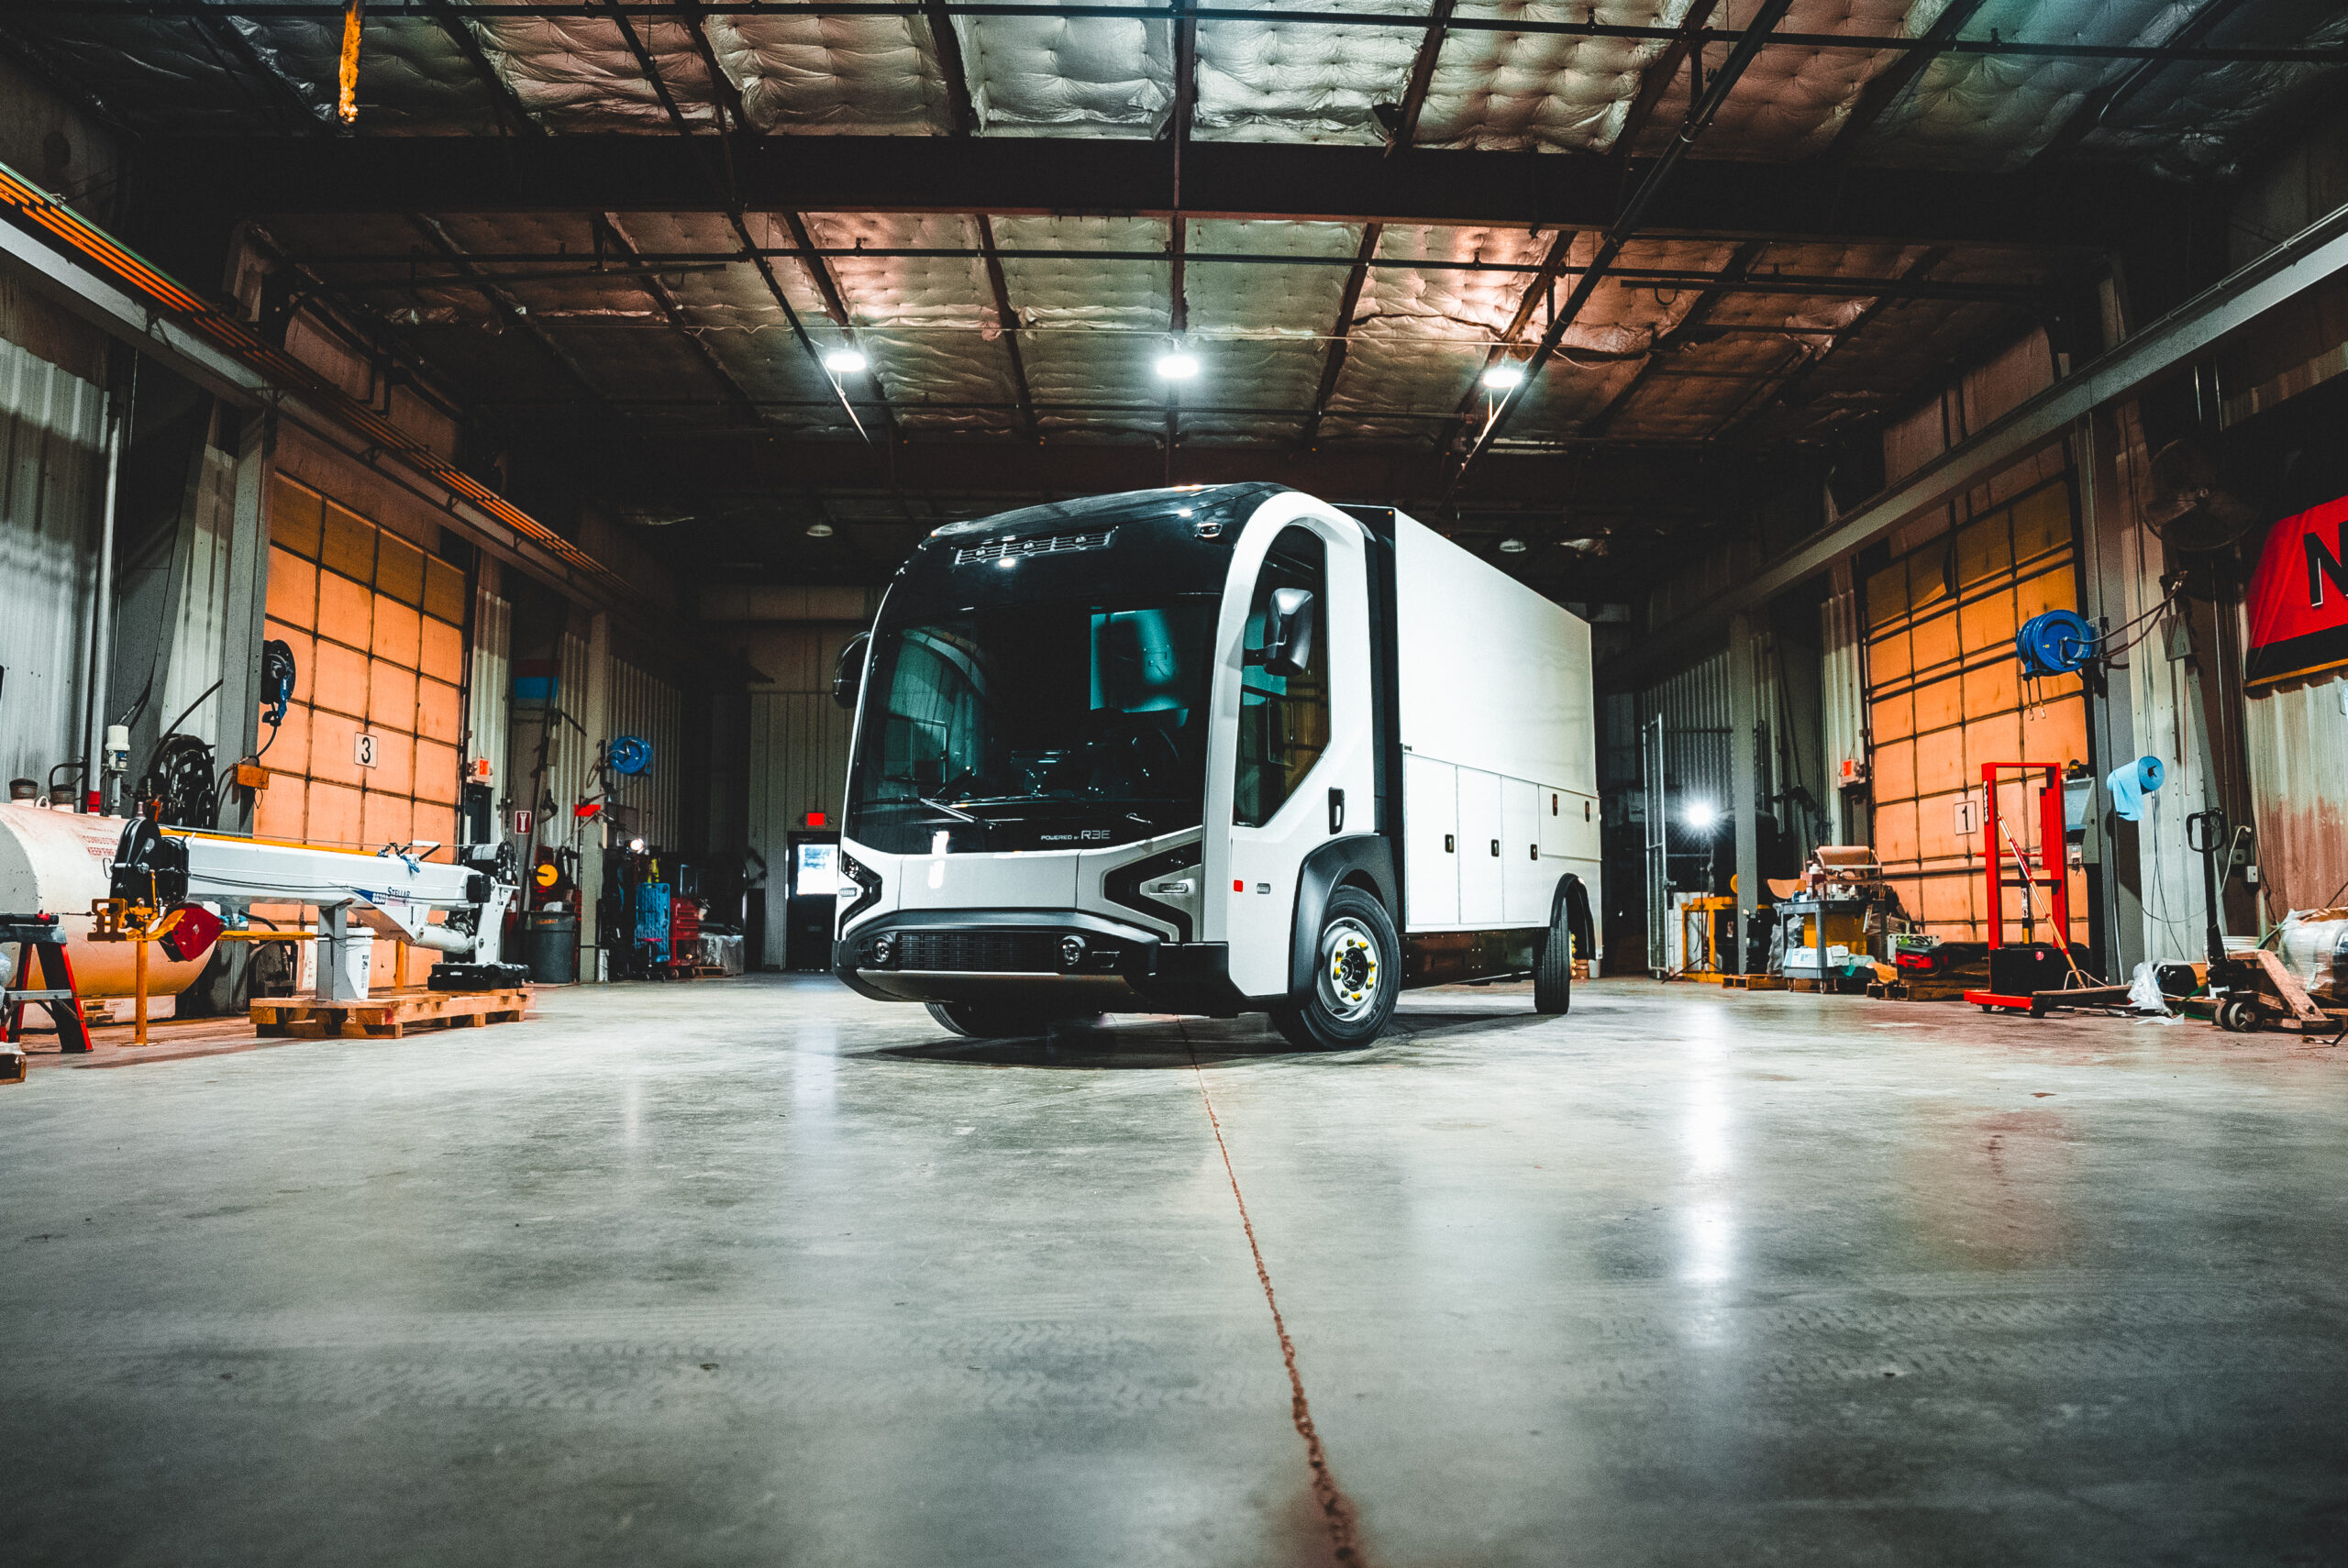 Ree Automotive Prepares for First Public Vehicle Reveal | THE SHOP